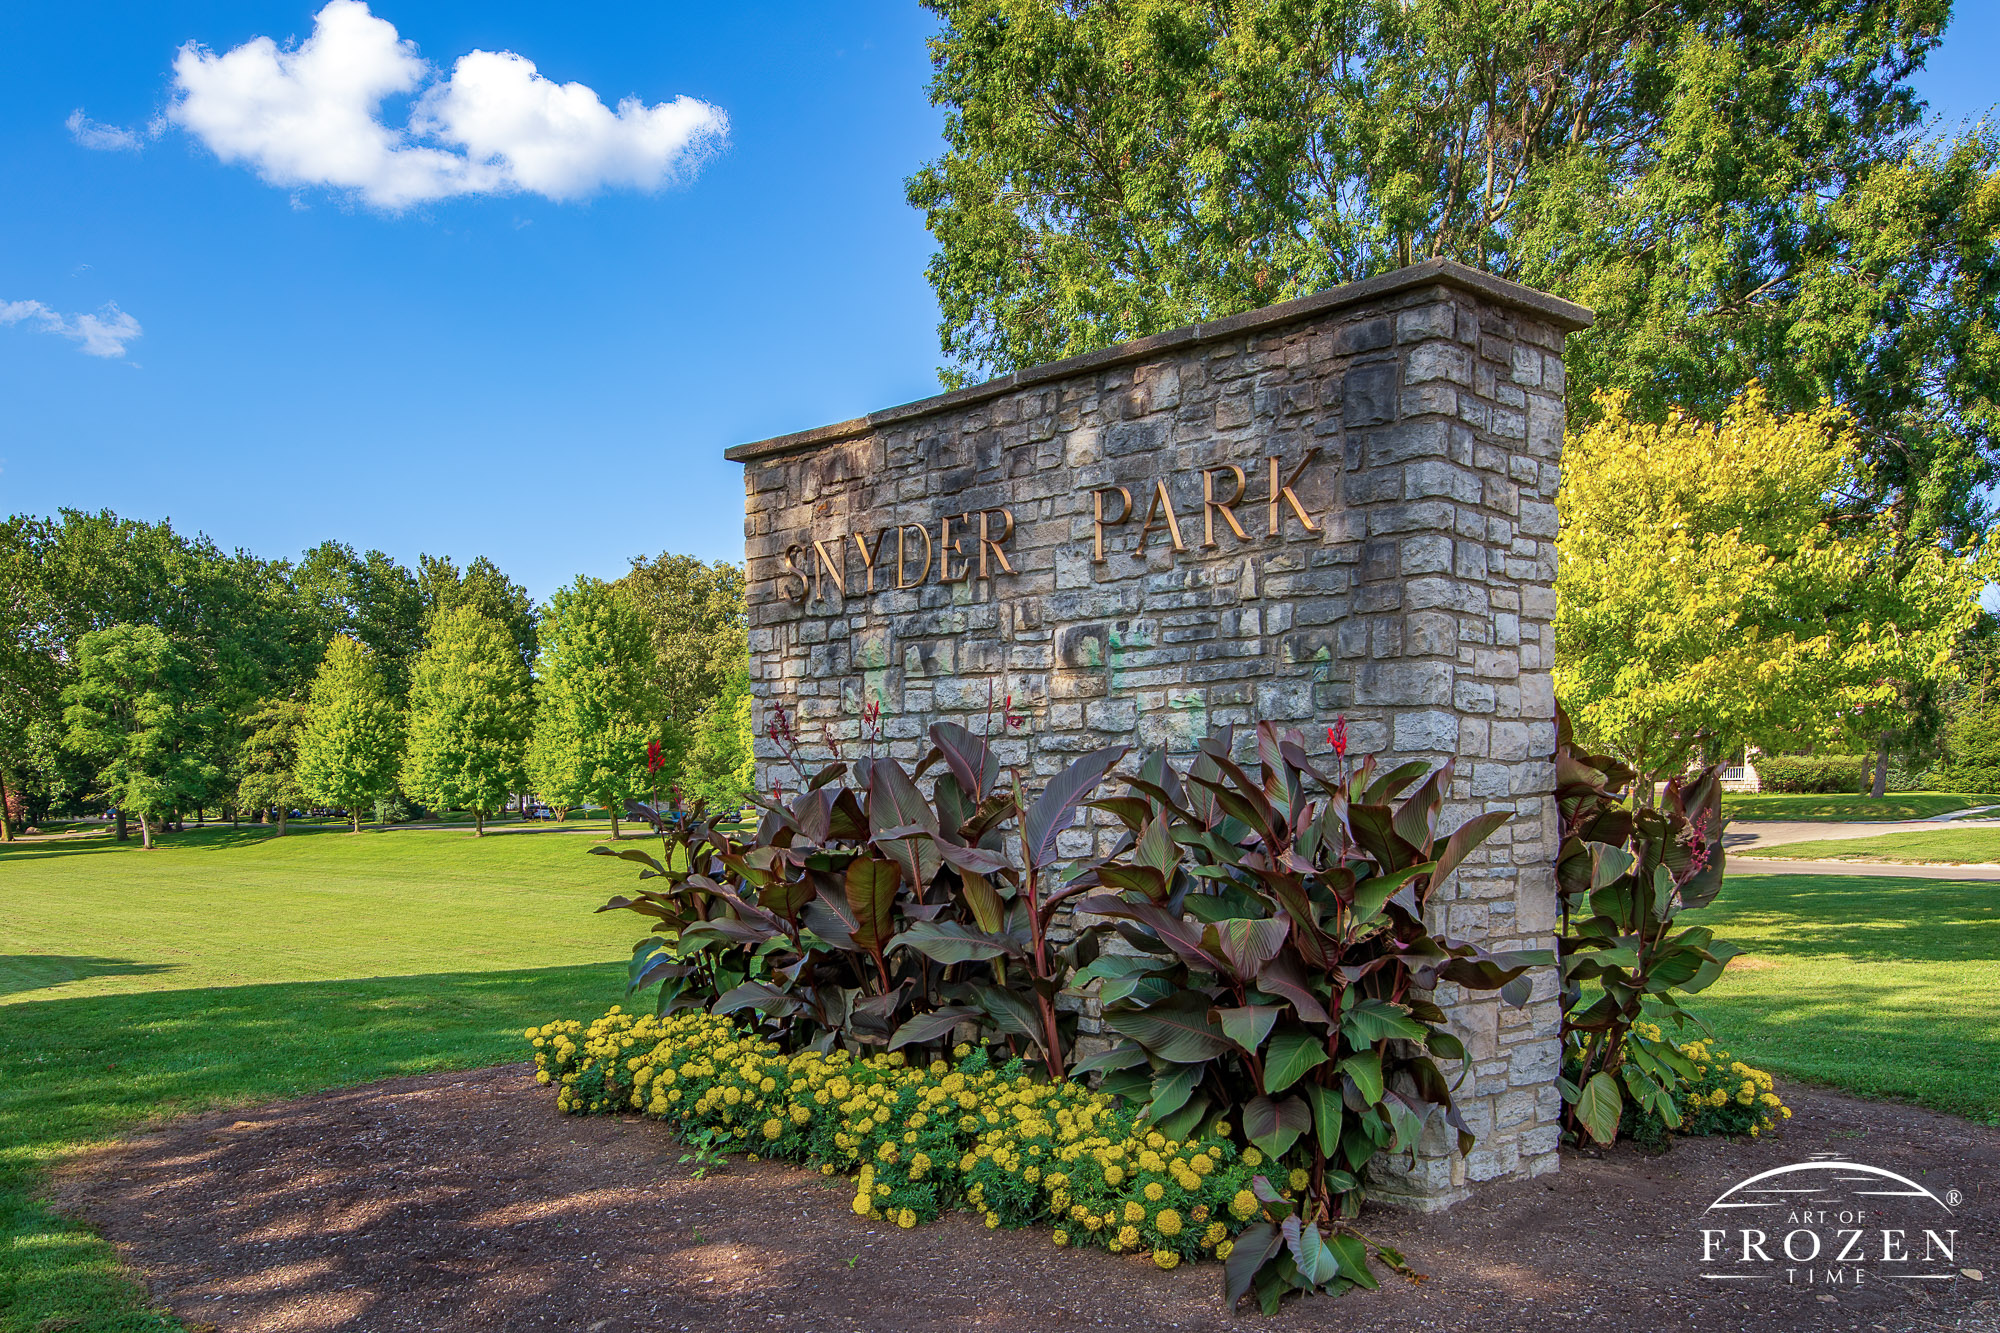 The Snyder Park stone sign surrounded by flower bed welcoming Springfield Ohio visitors to its features